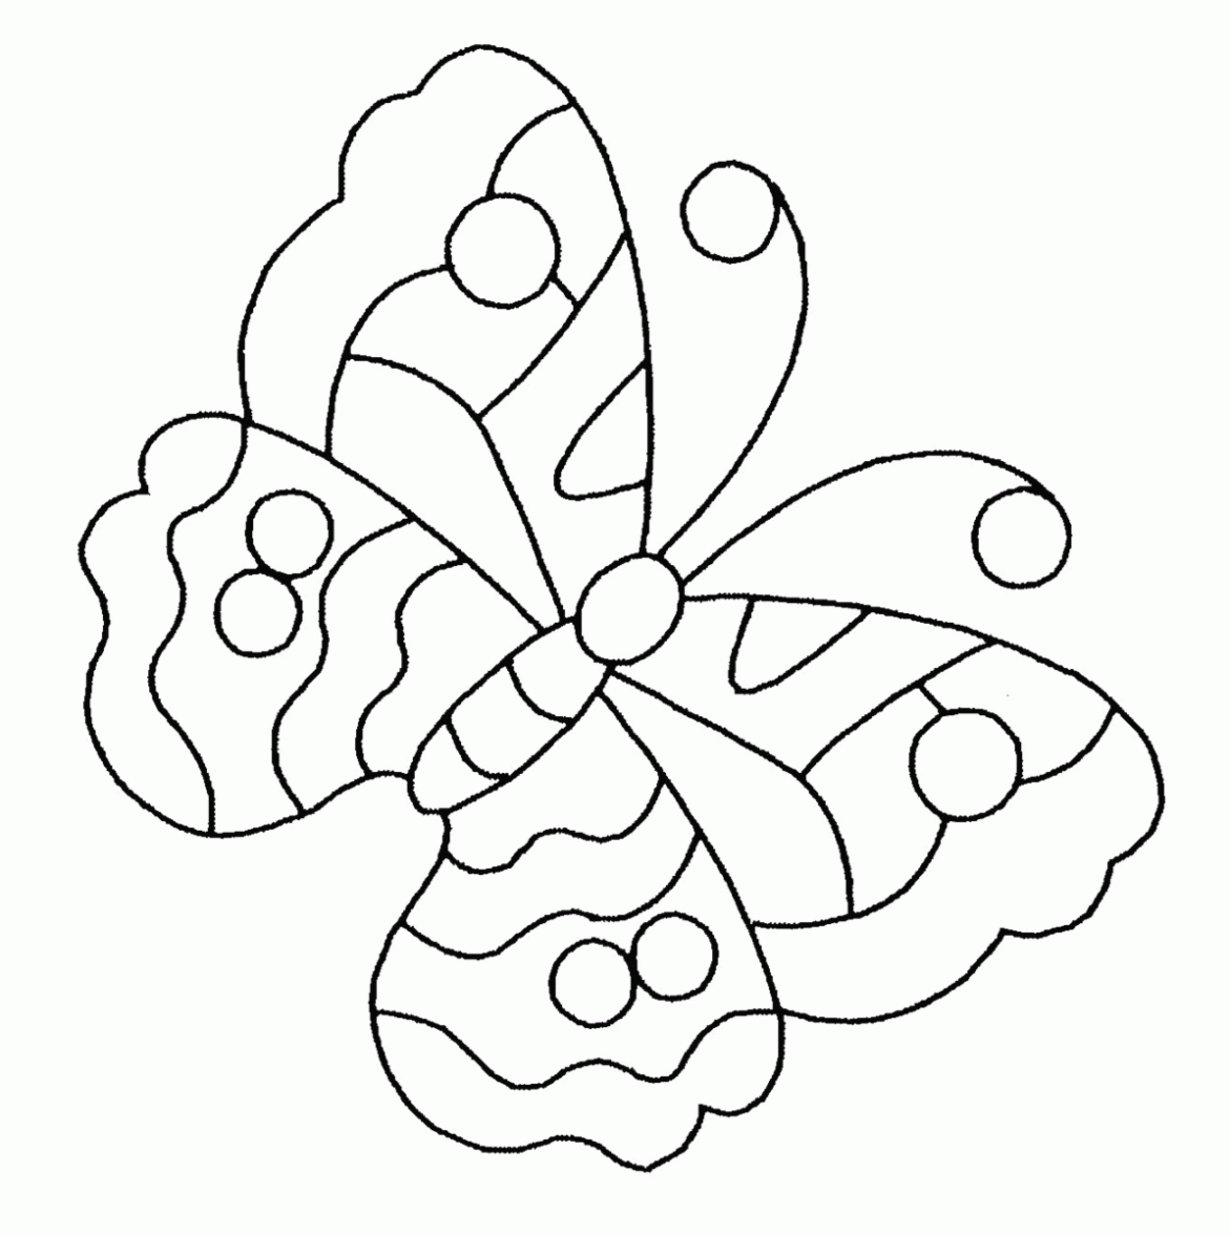 Free Printable Butterfly Coloring Pages For Kids BEDECOR Free Coloring Picture wallpaper give a chance to color on the wall without getting in trouble! Fill the walls of your home or office with stress-relieving [bedroomdecorz.blogspot.com]